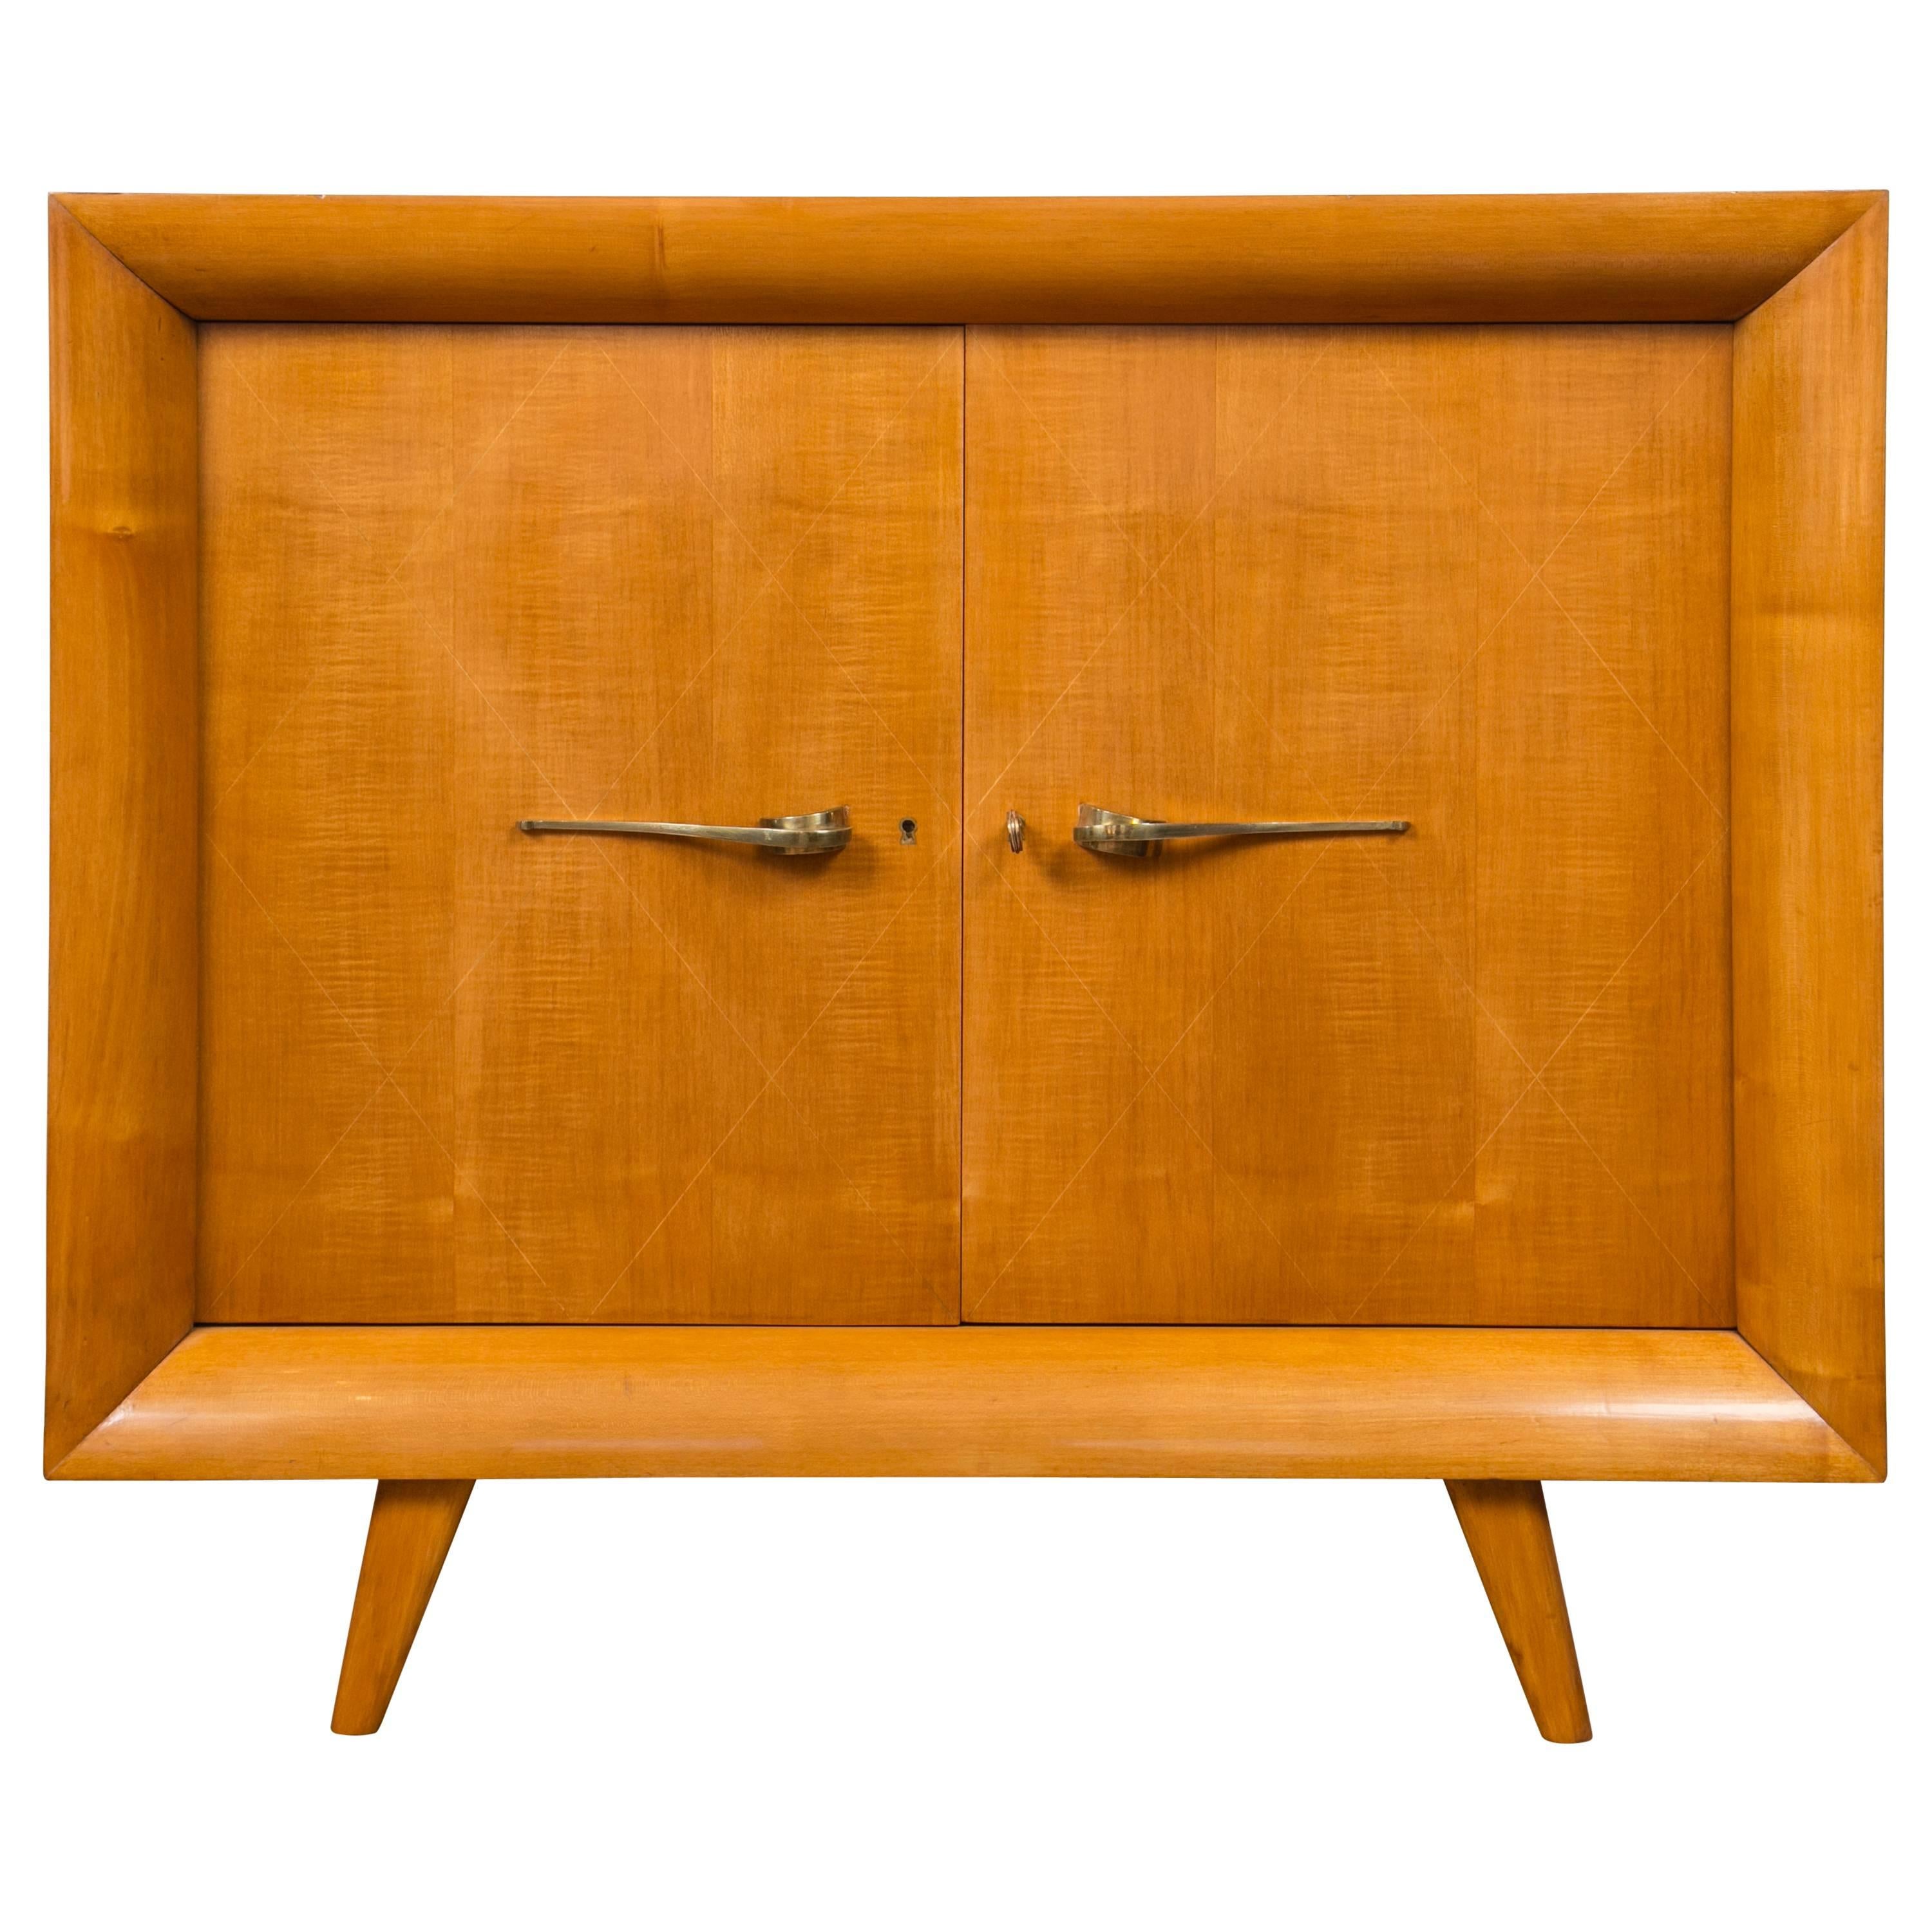 French Modernist Cabinet by Suzanne Guiguichon